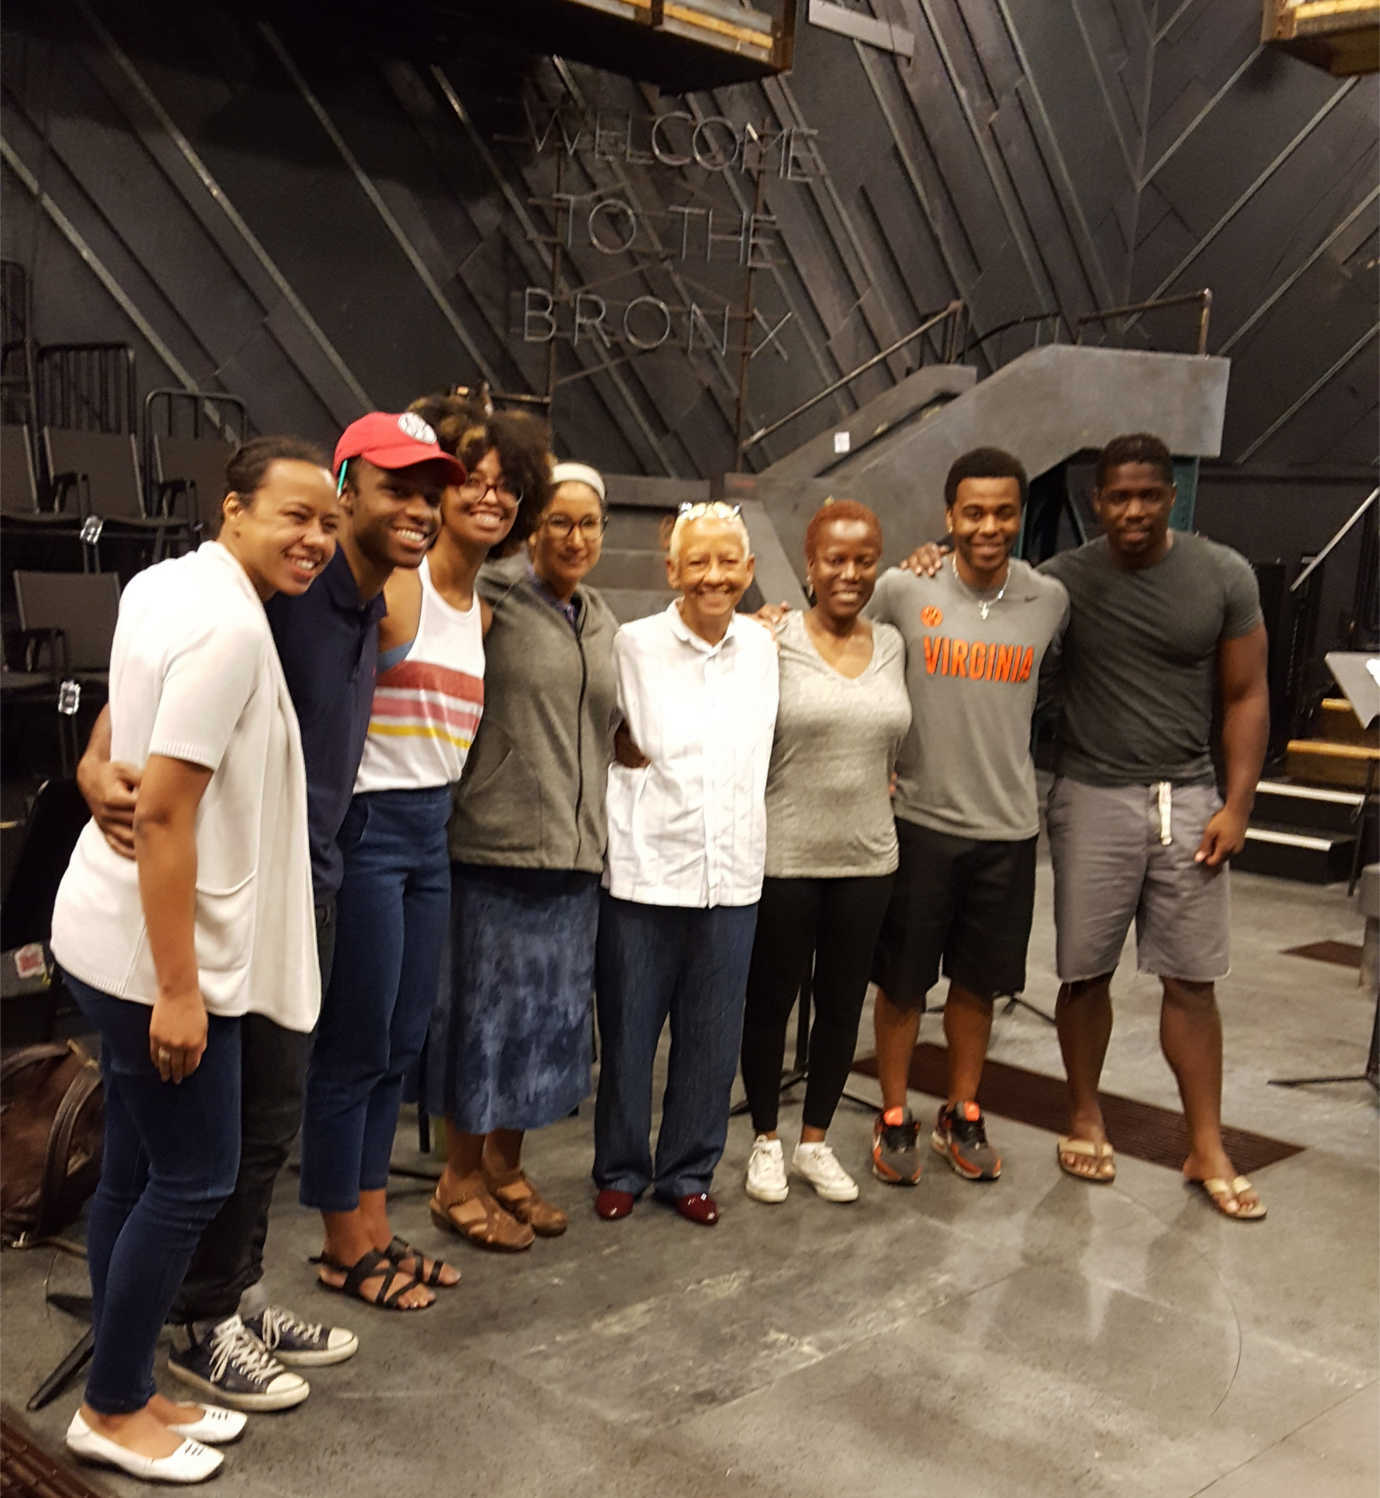 Teachers and actors pose with poet Nikki Giovanni.  Each summer,  Voices From the Misty Mountains collaborates with the Contemporary American Theatre Festival to produce a dramatic reading of Appalachian literature. Image courtesy of Shepherd University.